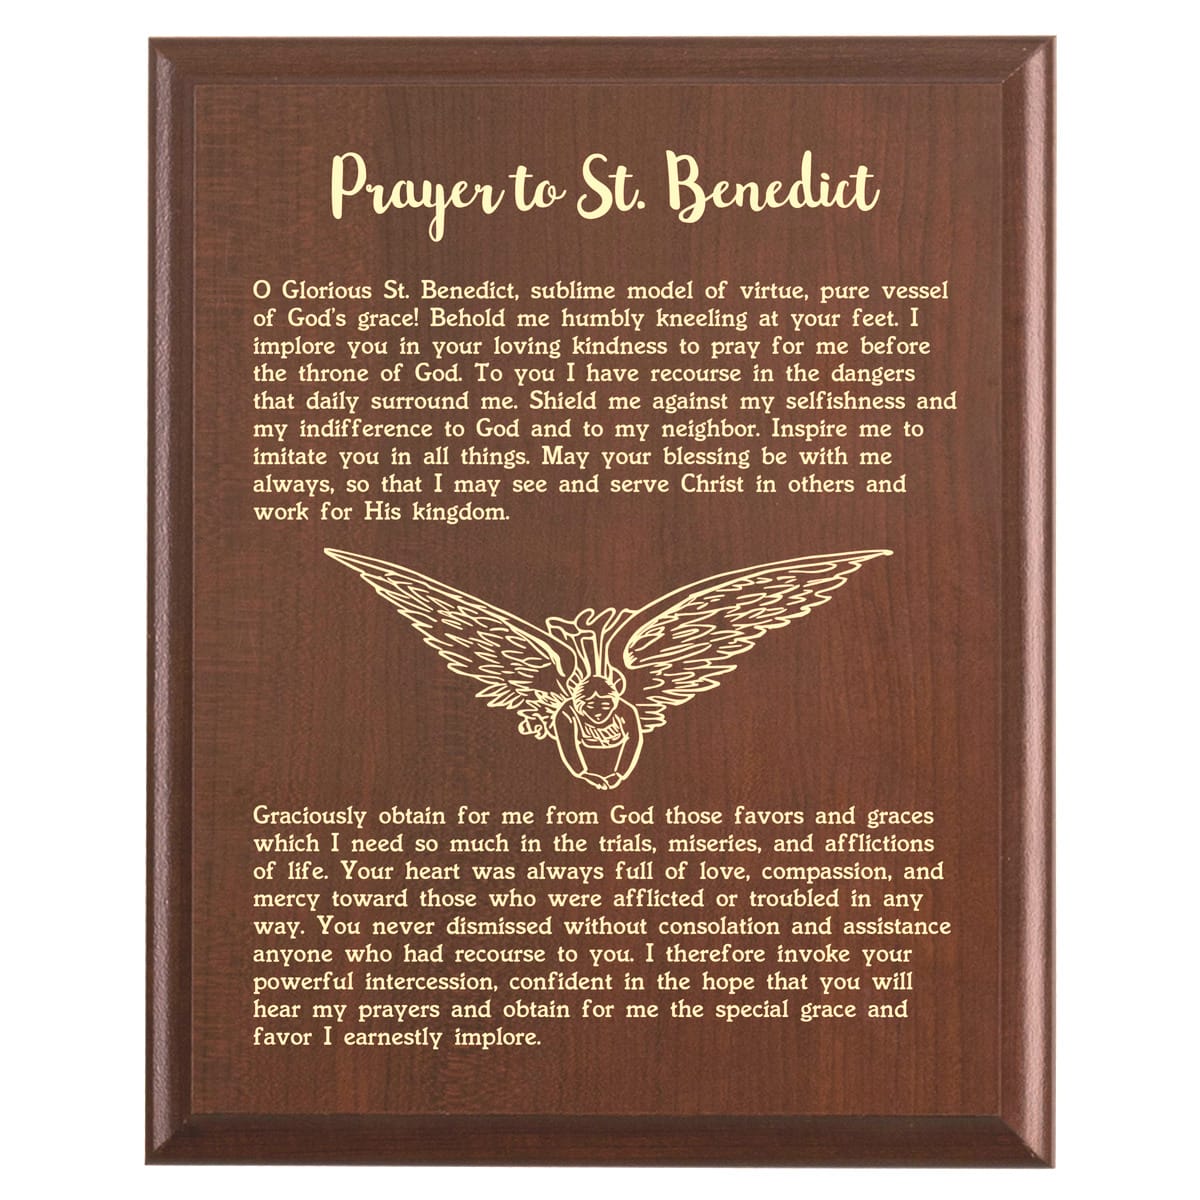 Plaque photo: St. Benedict Prayer Plaque design with free personalization. Wood style finish with customized text.